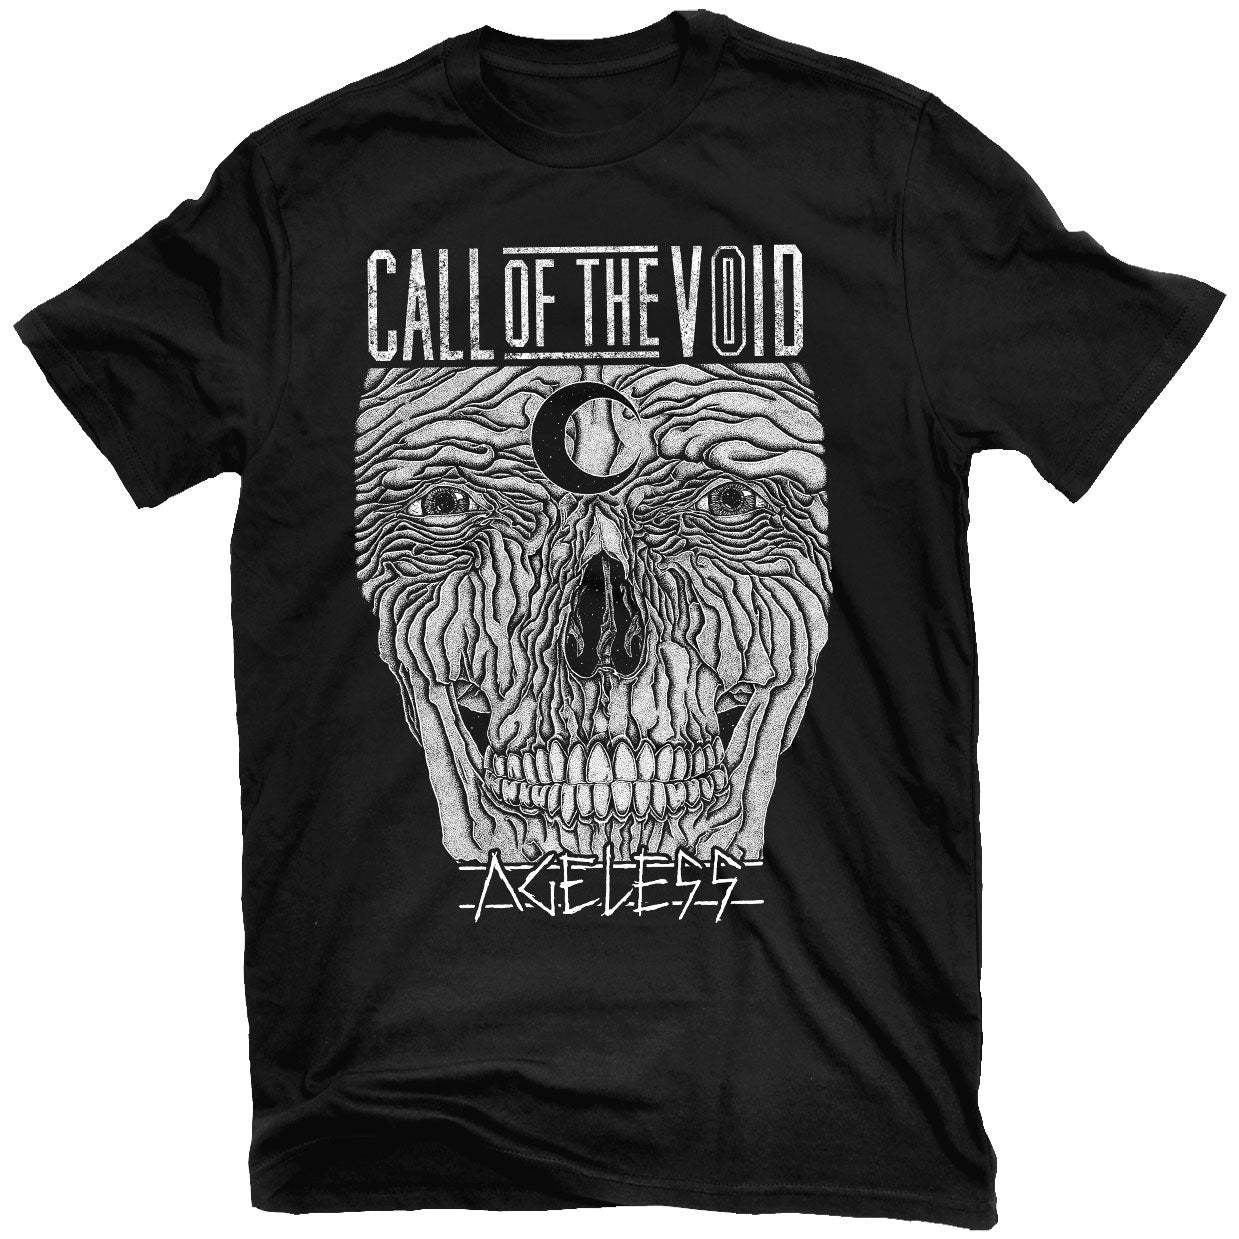 Call of the Void "Ageless" T-Shirt